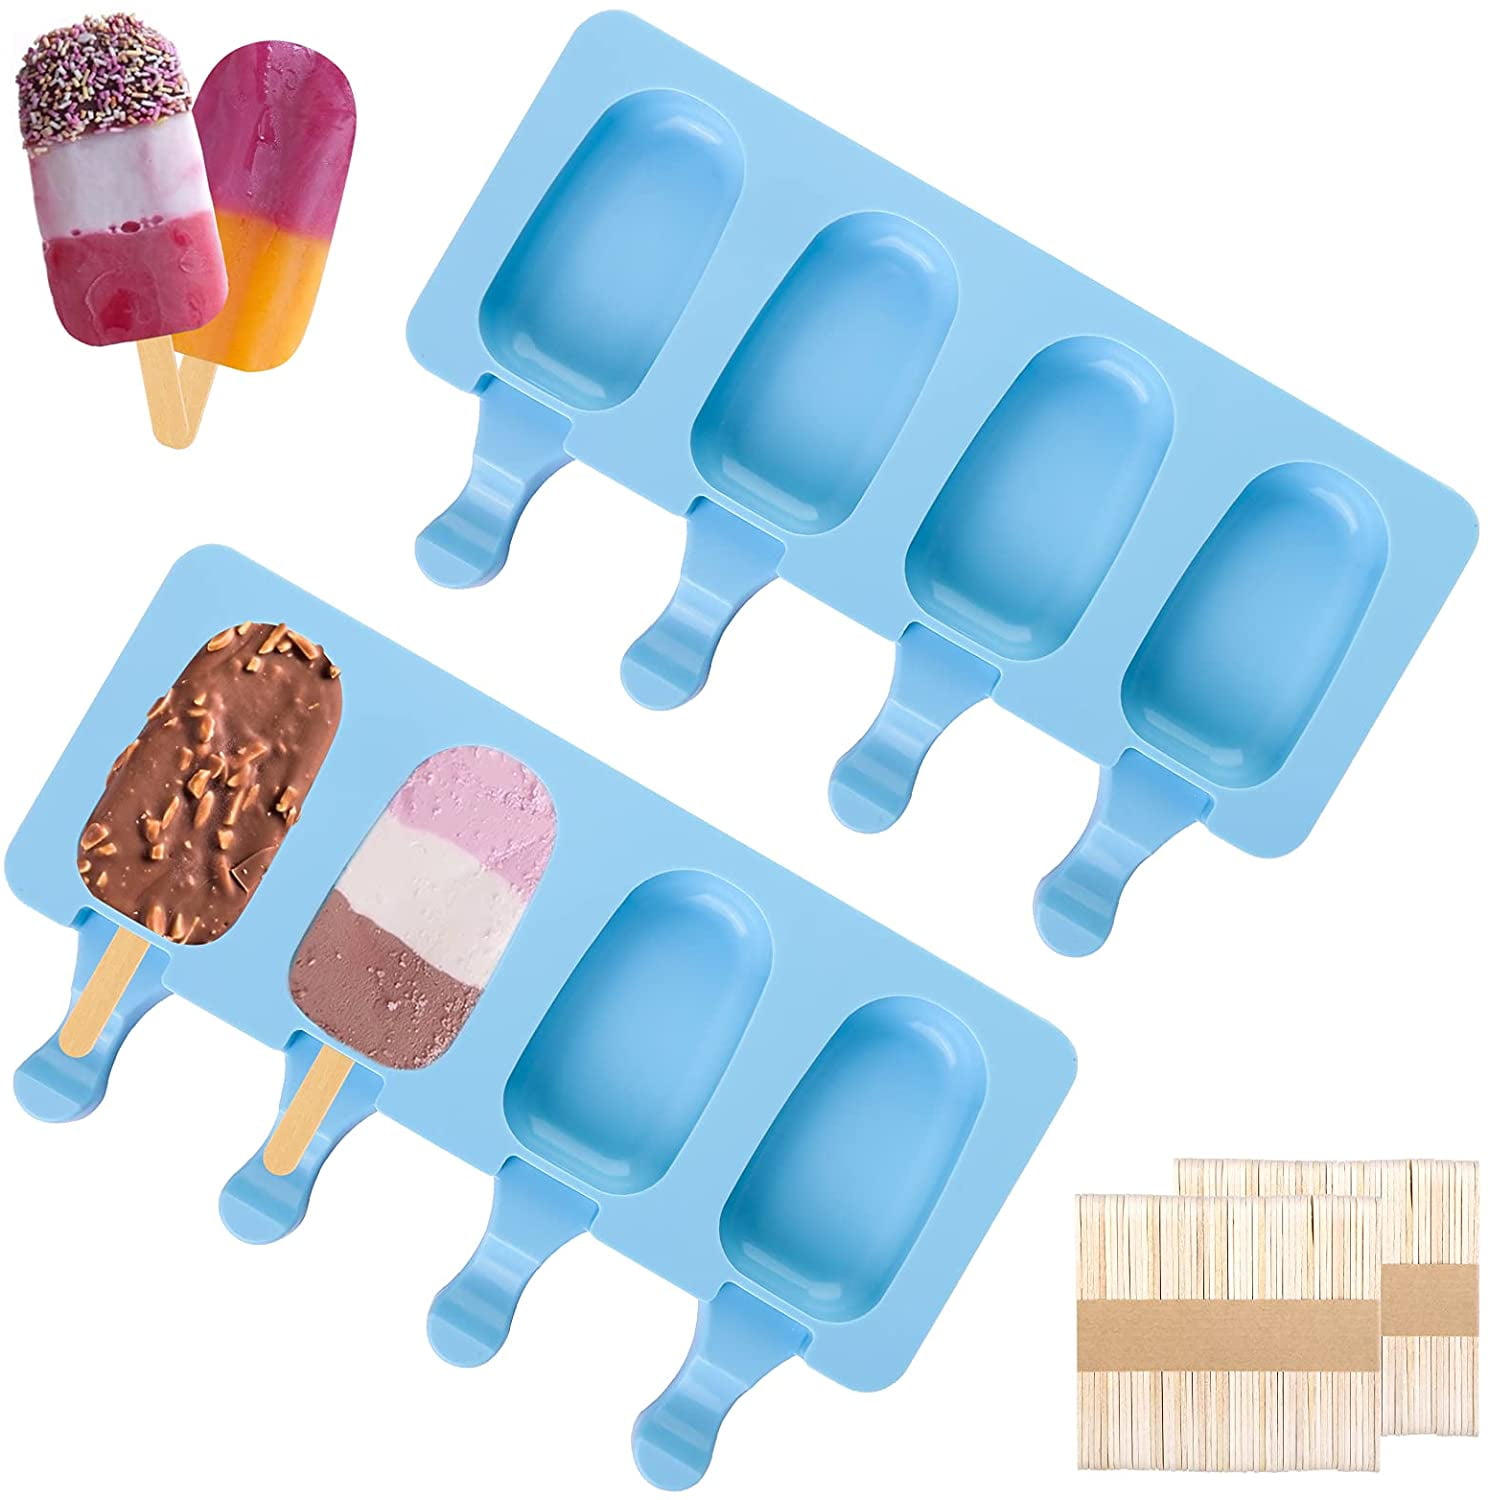 Dessert Mold Baking Mold Ice Cream Mold Popsicle Mold Details about   CAKESICLE MOLD 